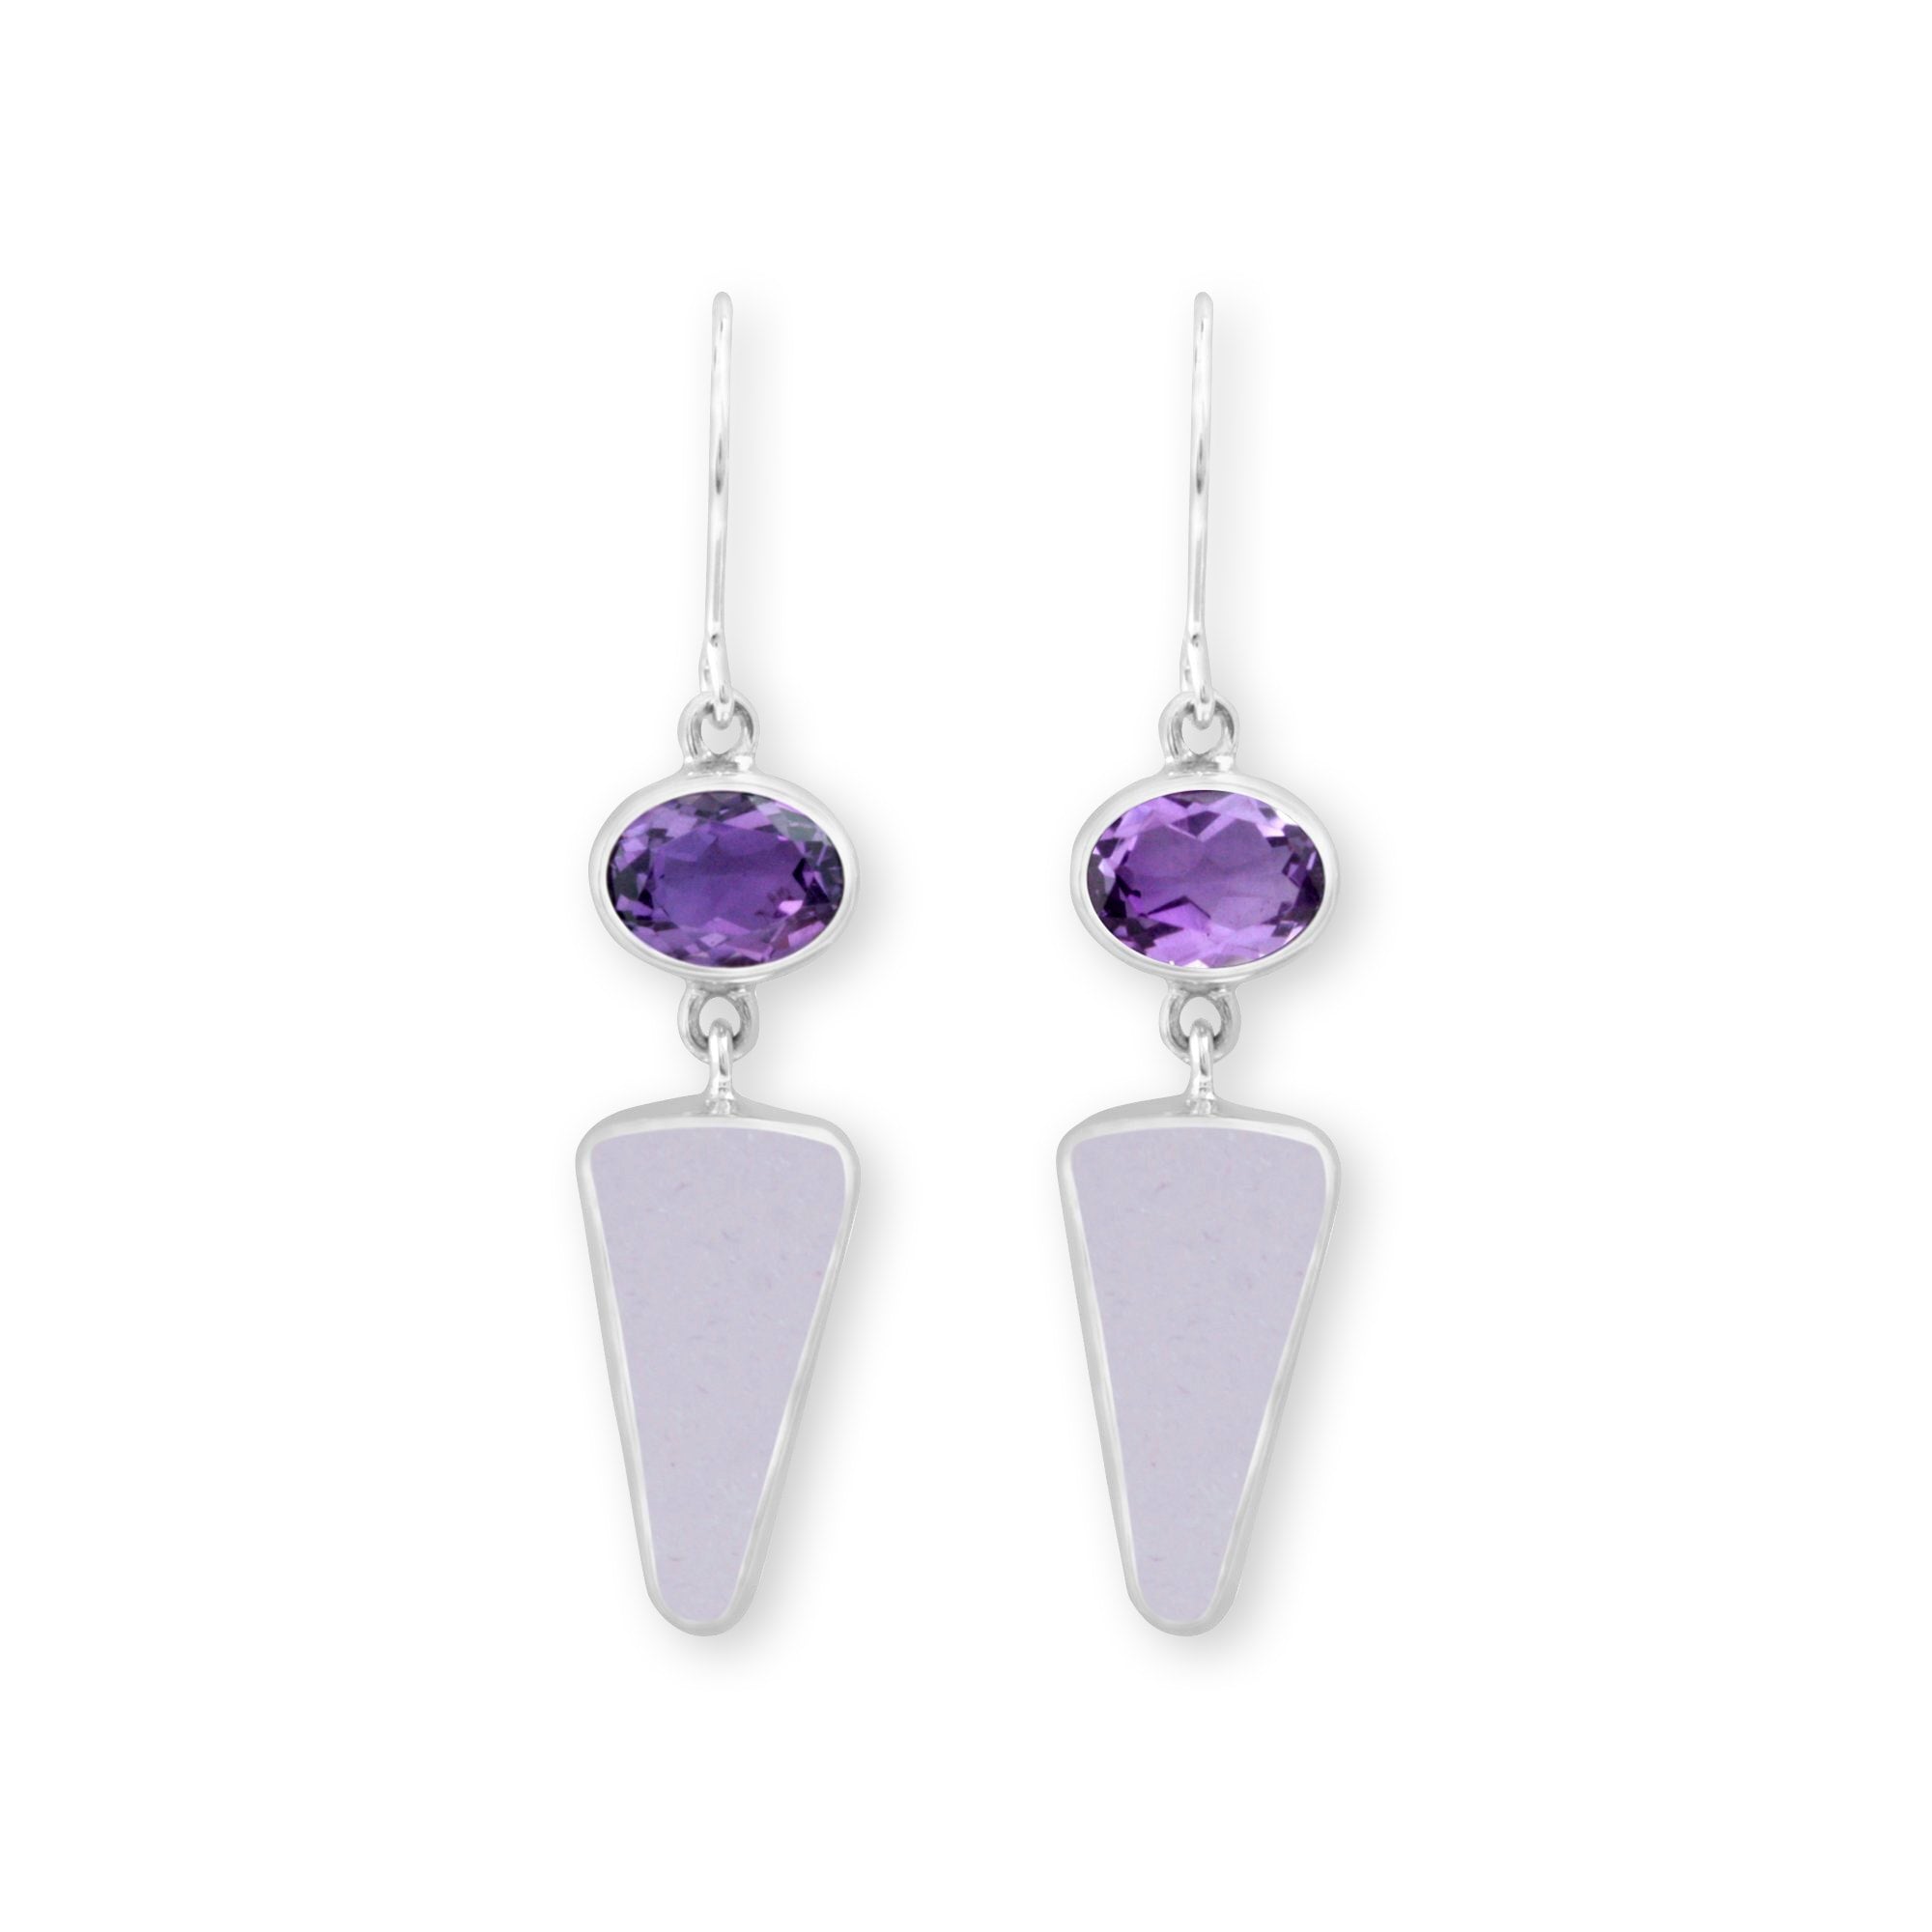 Amethyst Earrings from Mystical Madness